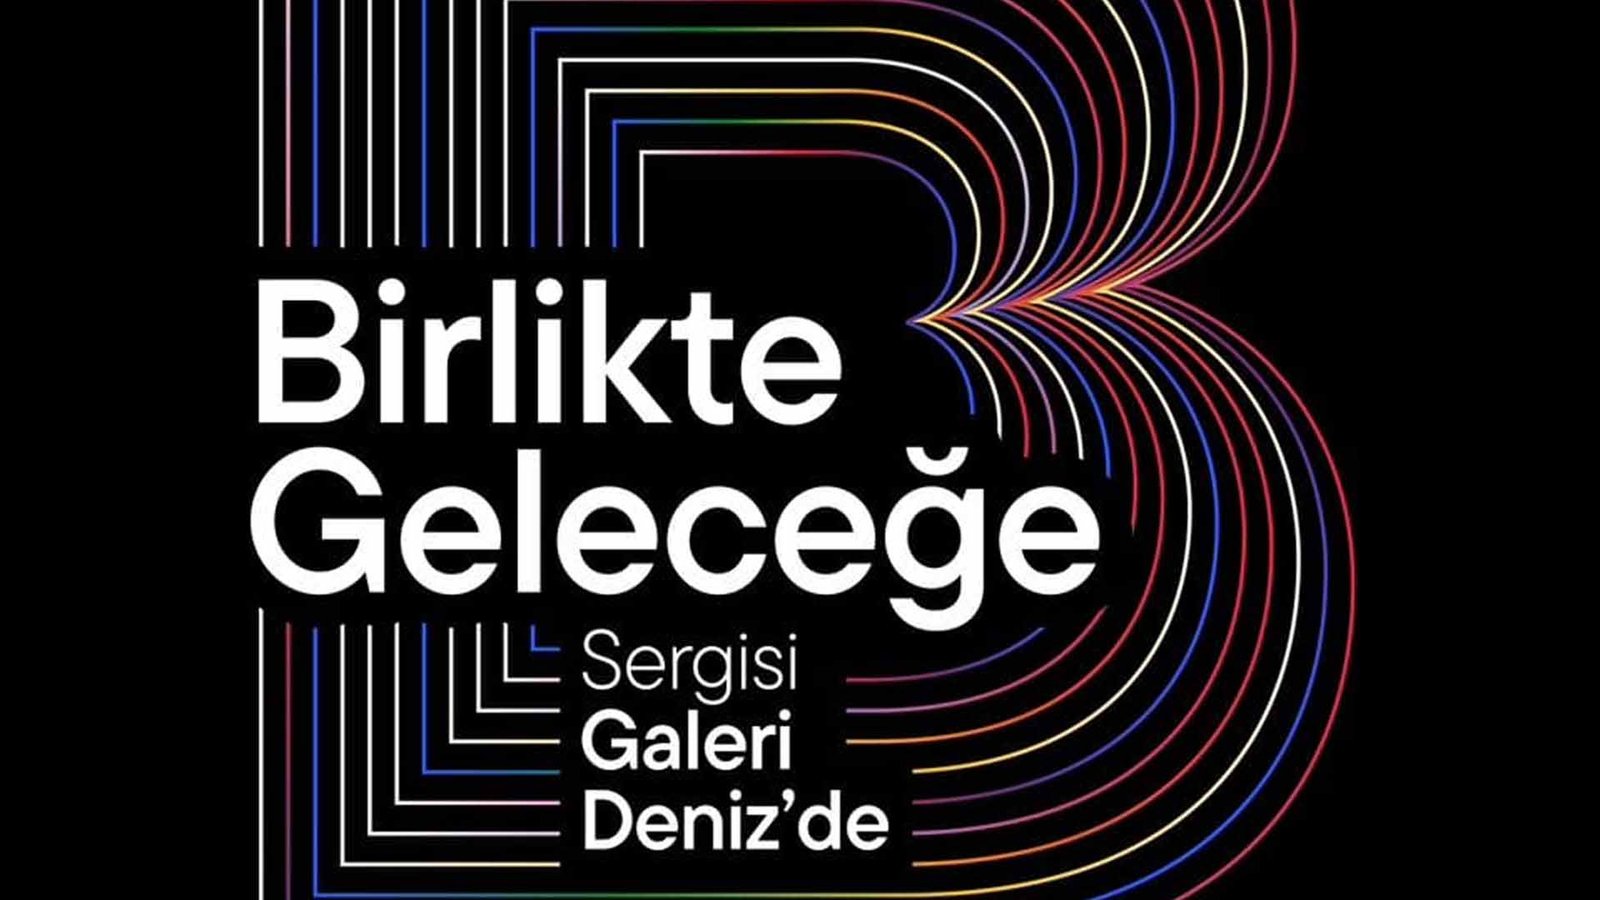 Meeting Of Young Art In Denizculture And Gallery Deniz 85 Works Of 48 Artists Are Being Exhibited